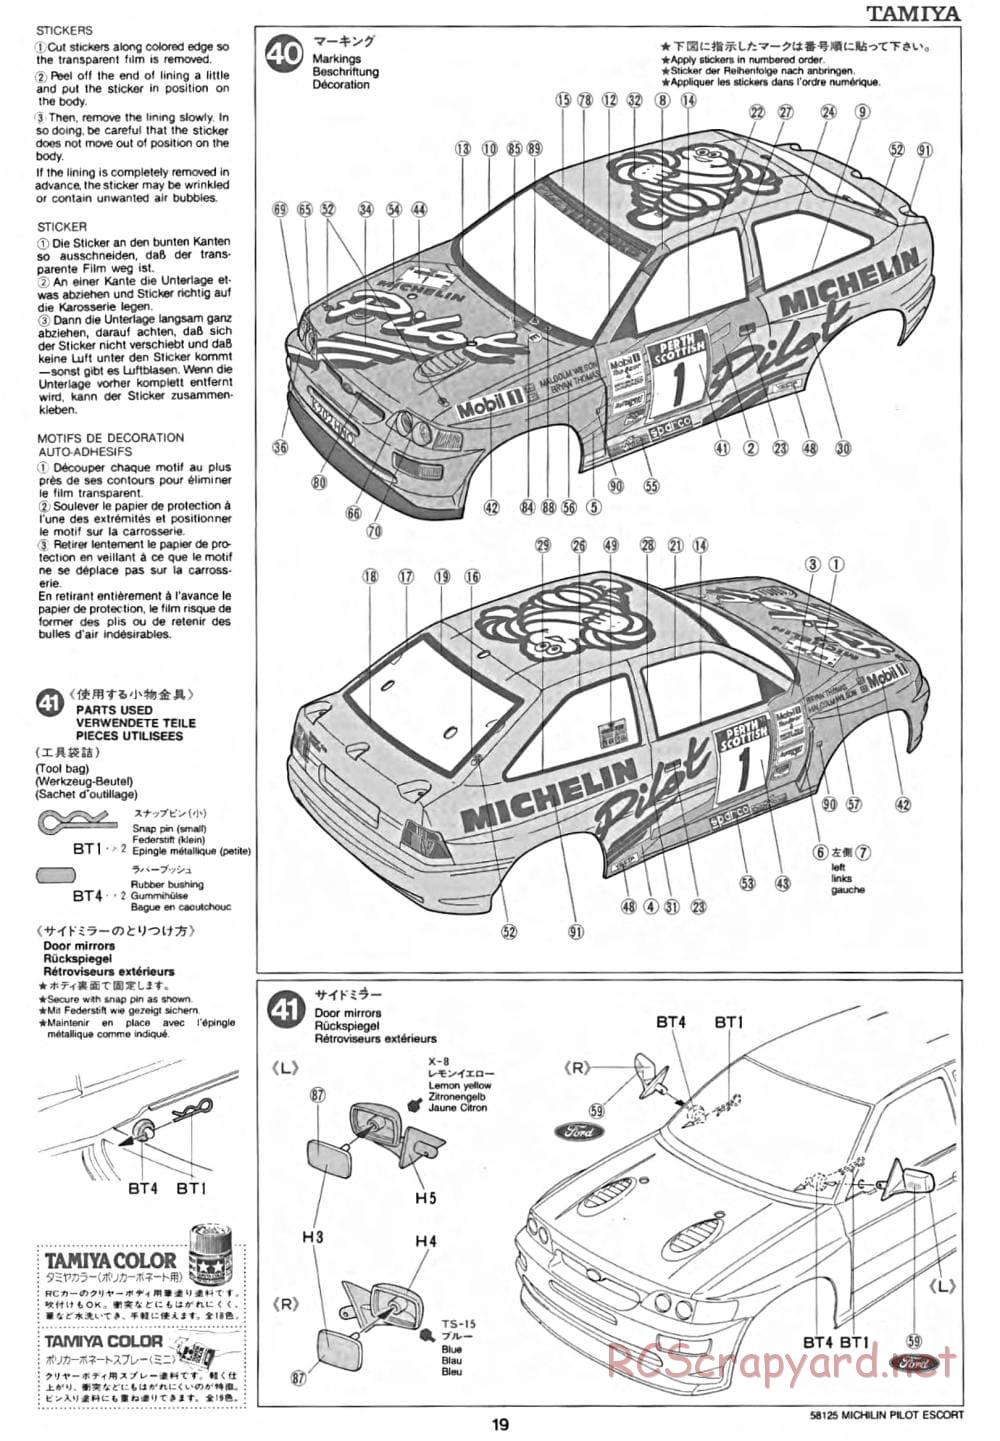 Tamiya - Michelin Pilot Ford Escort RS Cosworth - TA-01 Chassis - Manual - Page 20